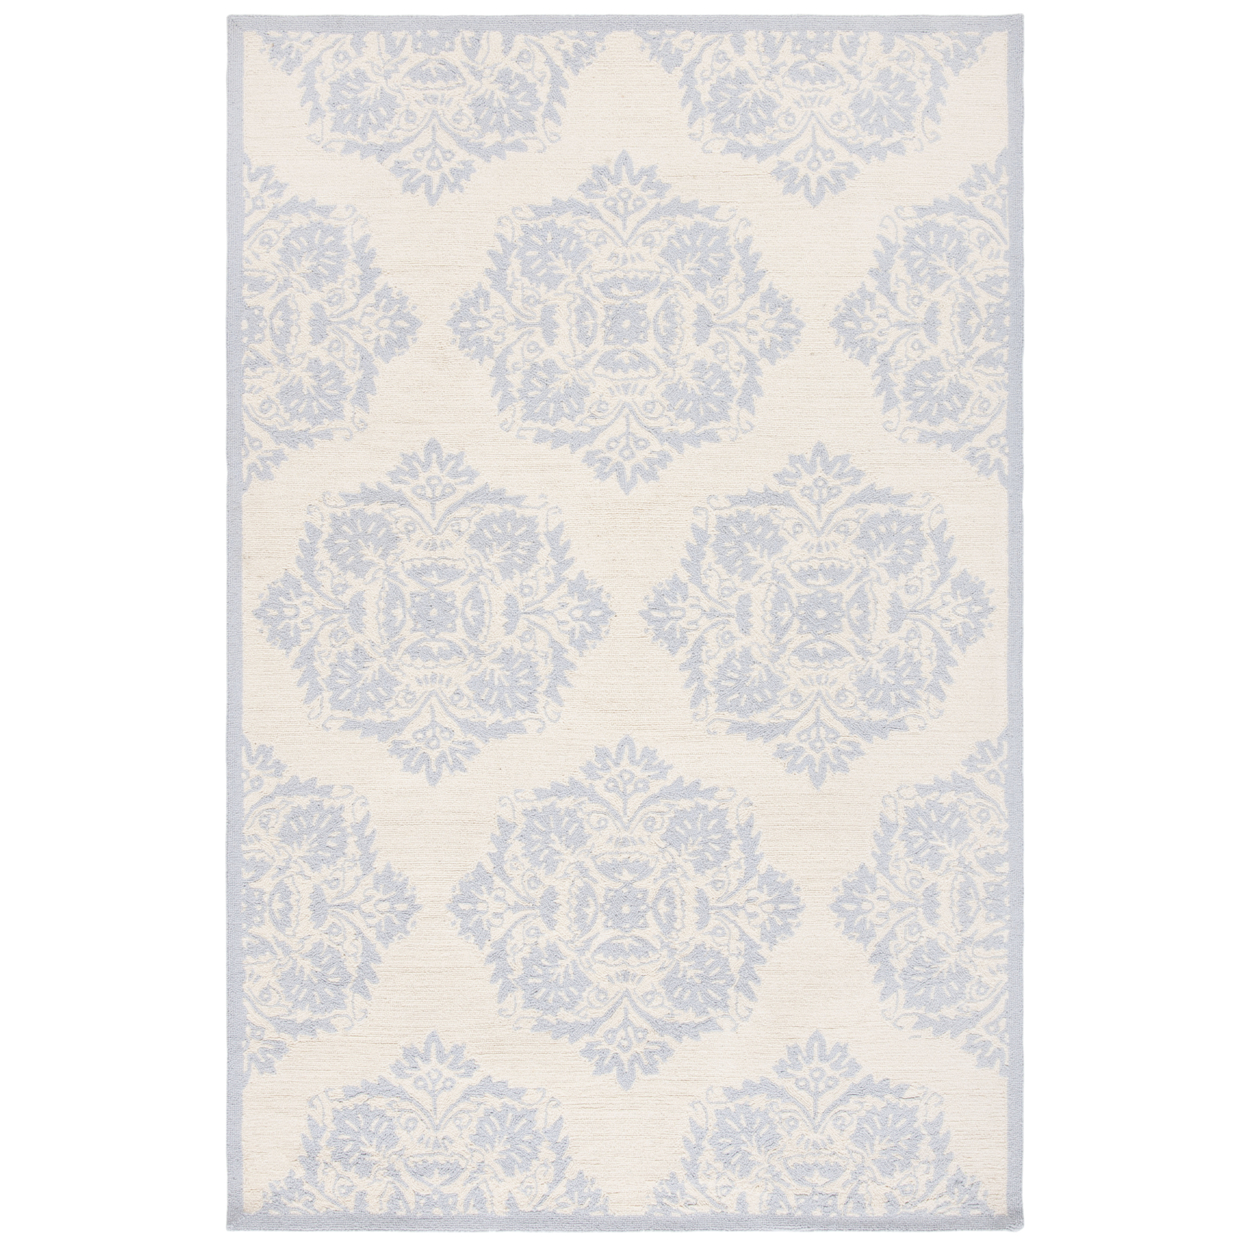 SAFAVIEH Chelsea HK359A Hand-hooked Ivory / Blue Rug - 4' 6 X 6' 6 Oval